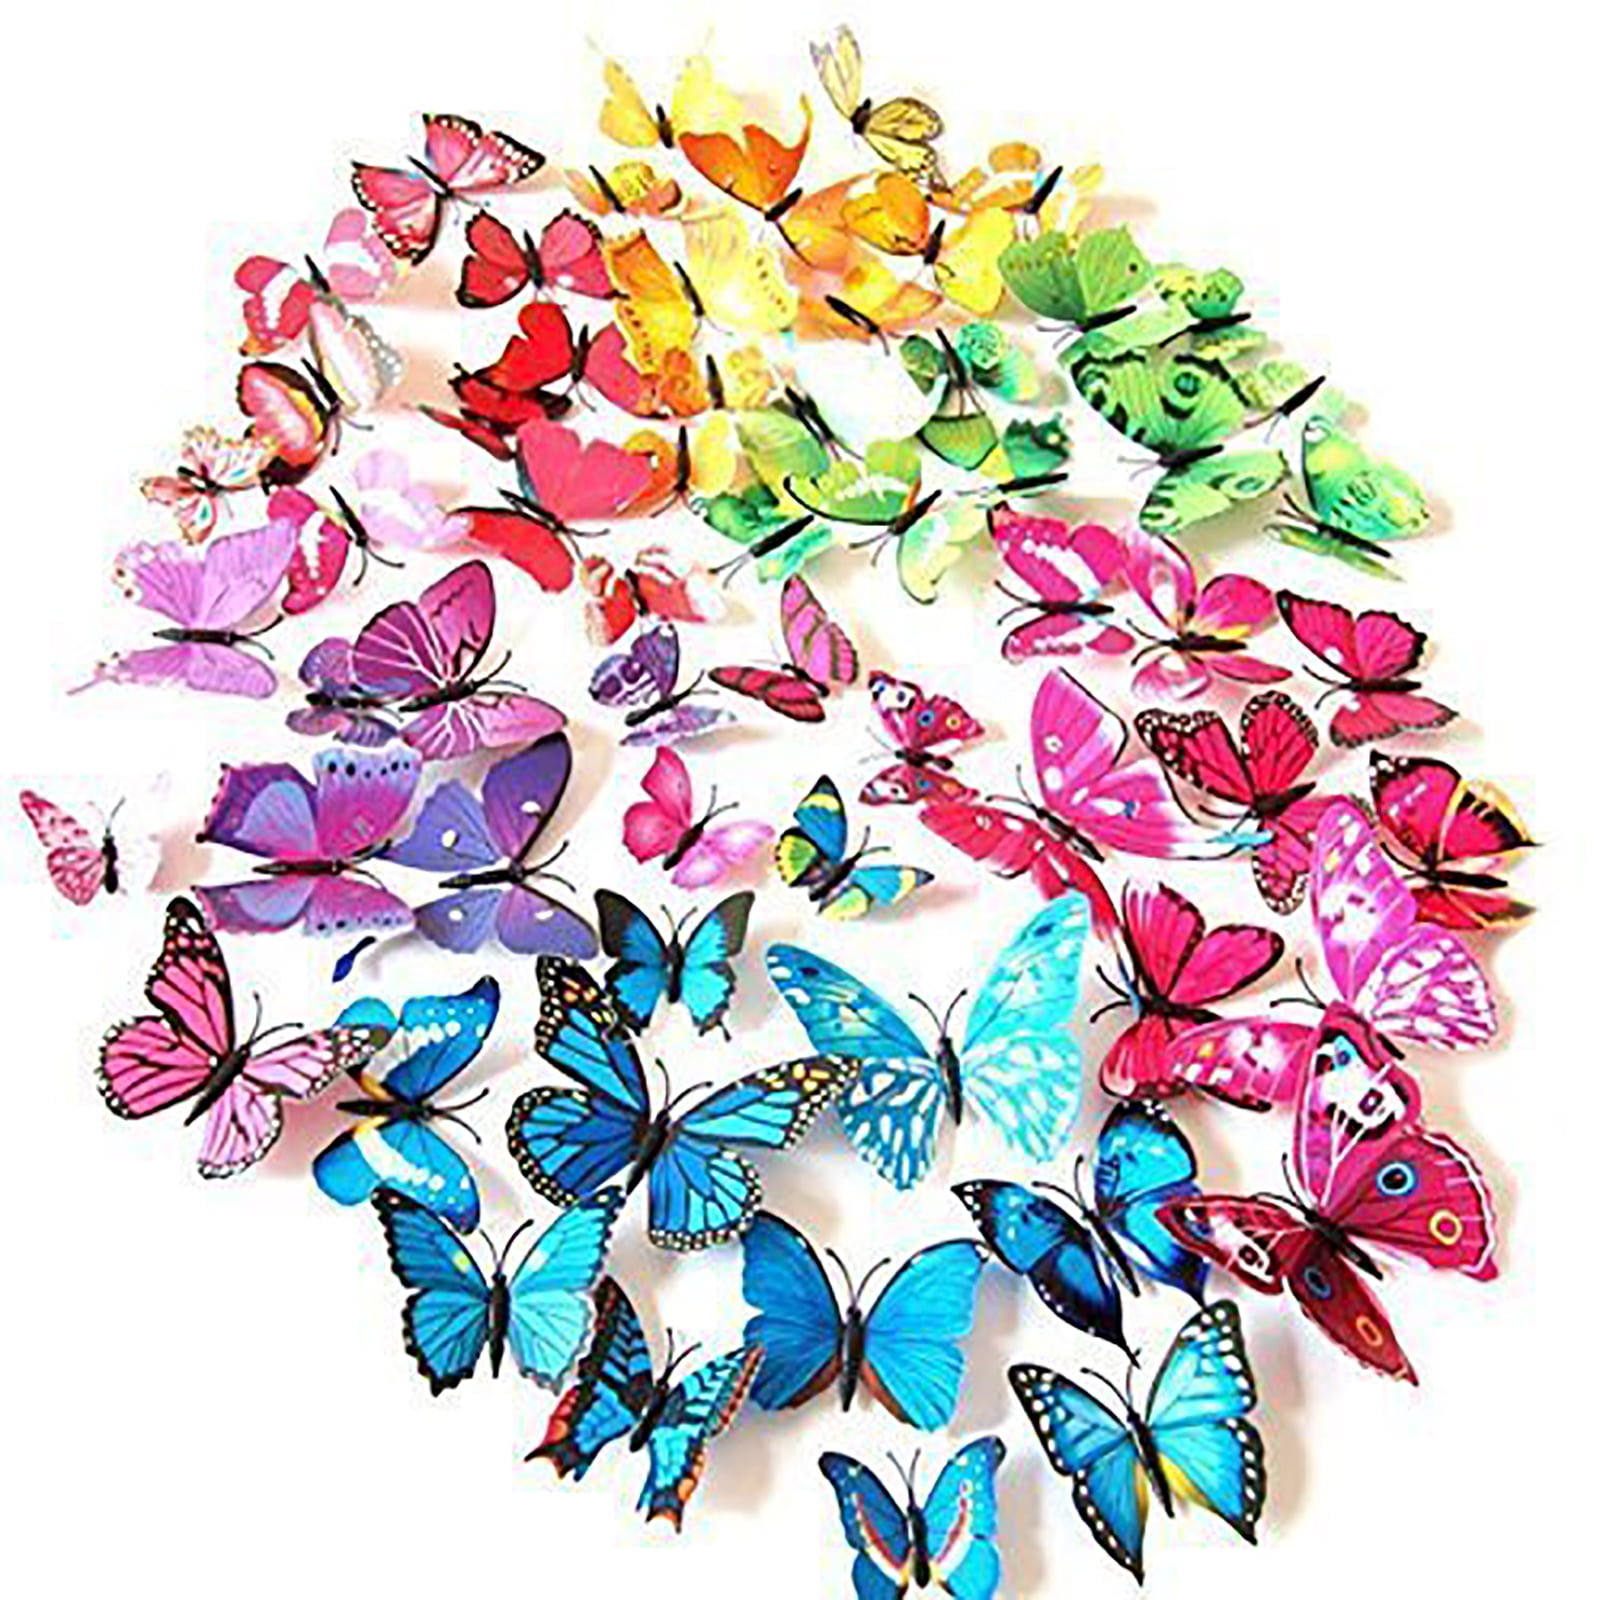 walolo 96PCS 3D Butterfly Wall Stickers Multicolor Crafts Butterflies Magnetic Decals for Kids Room Decoration 